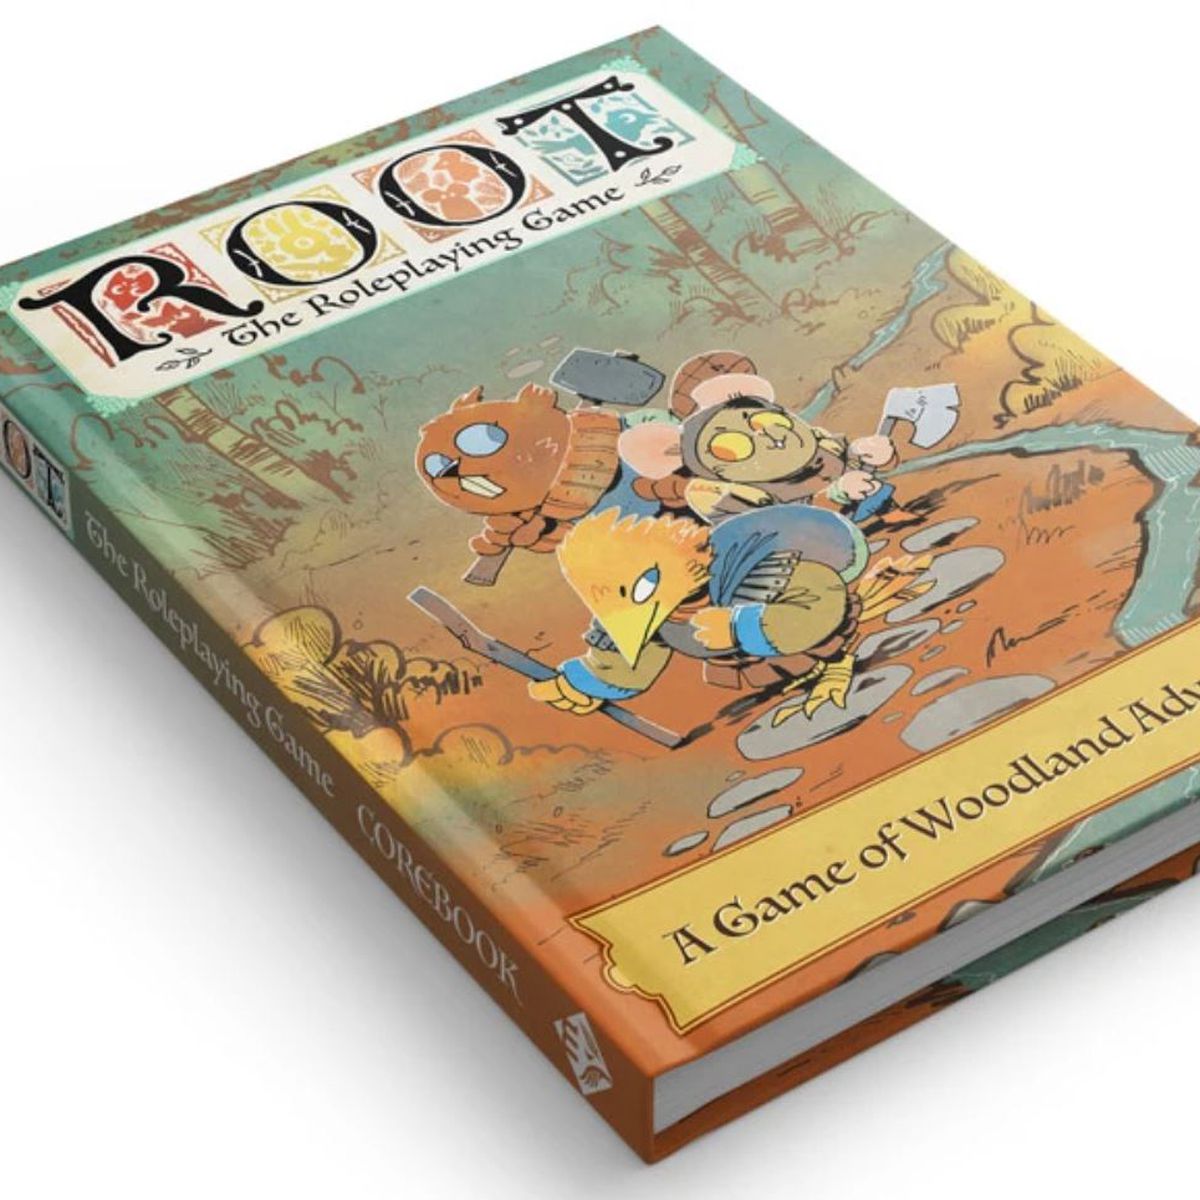 The cover of Root: The Roleplaying Game